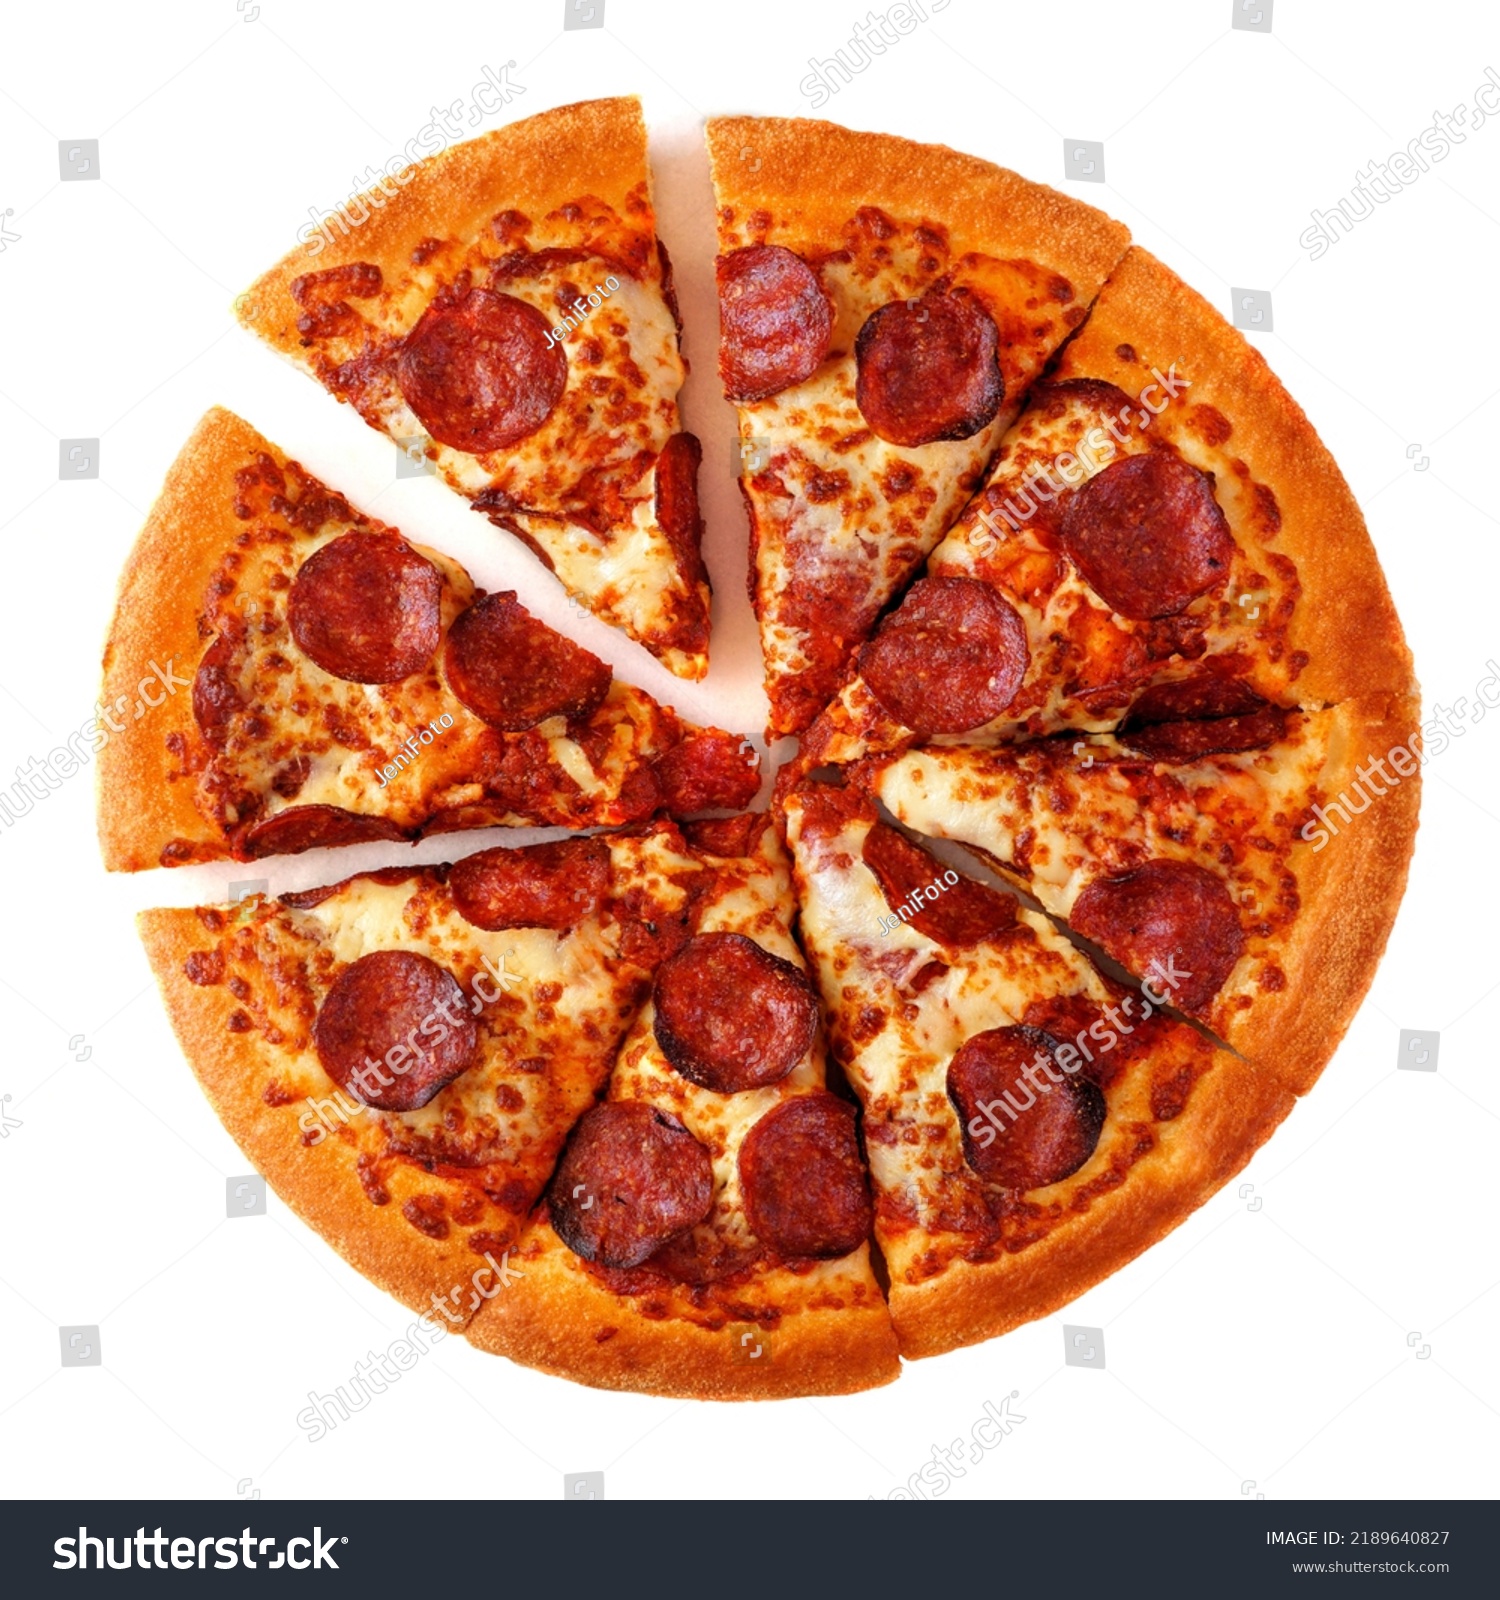 Classic pepperoni pizza with cut slices isolated on a white background #2189640827